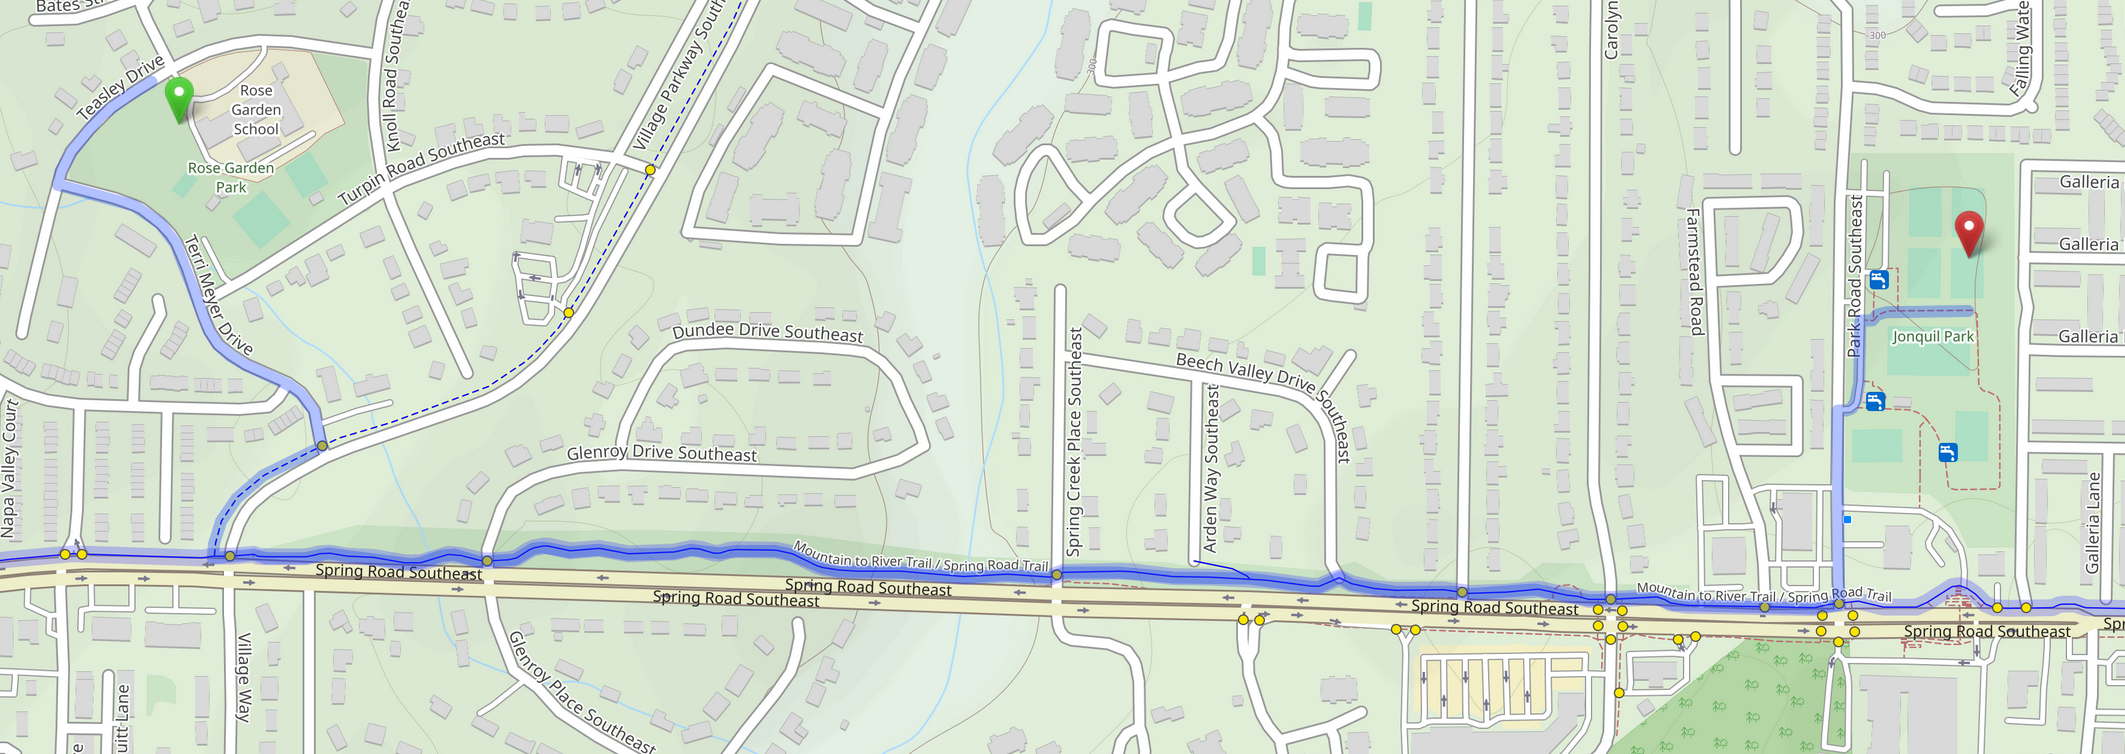 Map showing a bike route from Rose Garden Park through Spring Road Linear Park to Jonquil Park